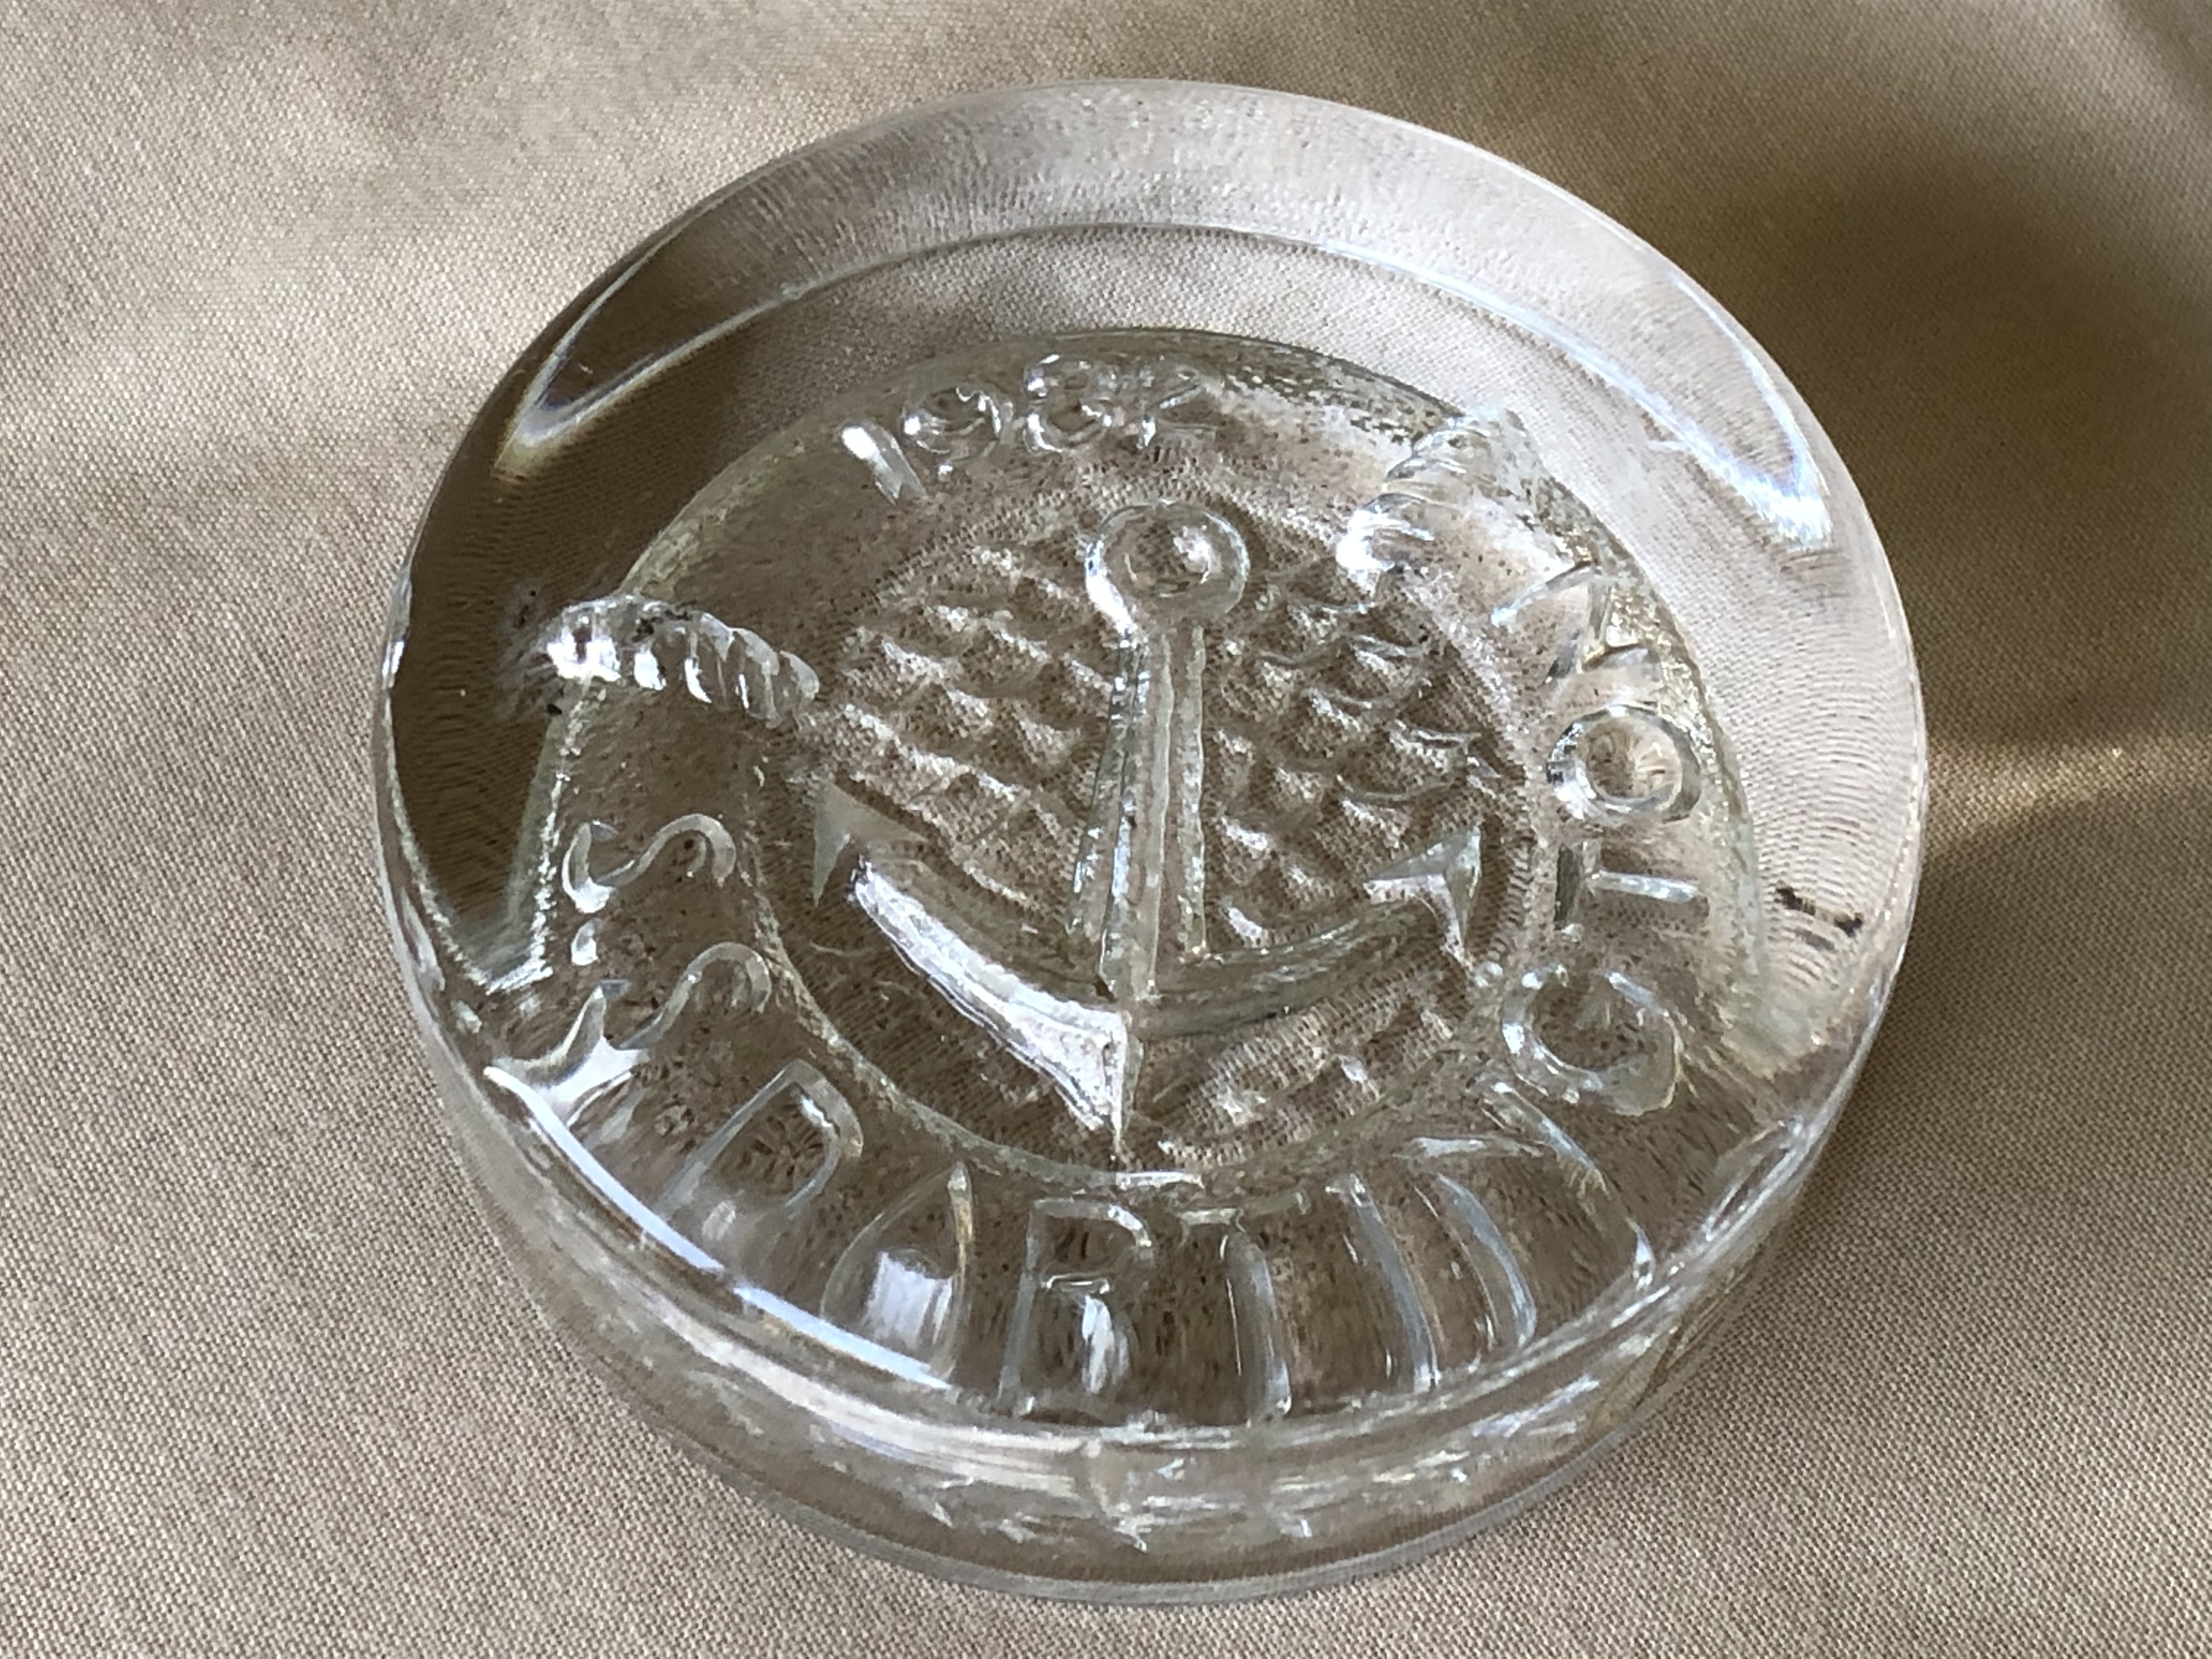 GLASS PAPERWEIGHT SOUVENIR FROM THE VESSEL THE SS DARTINGTON 